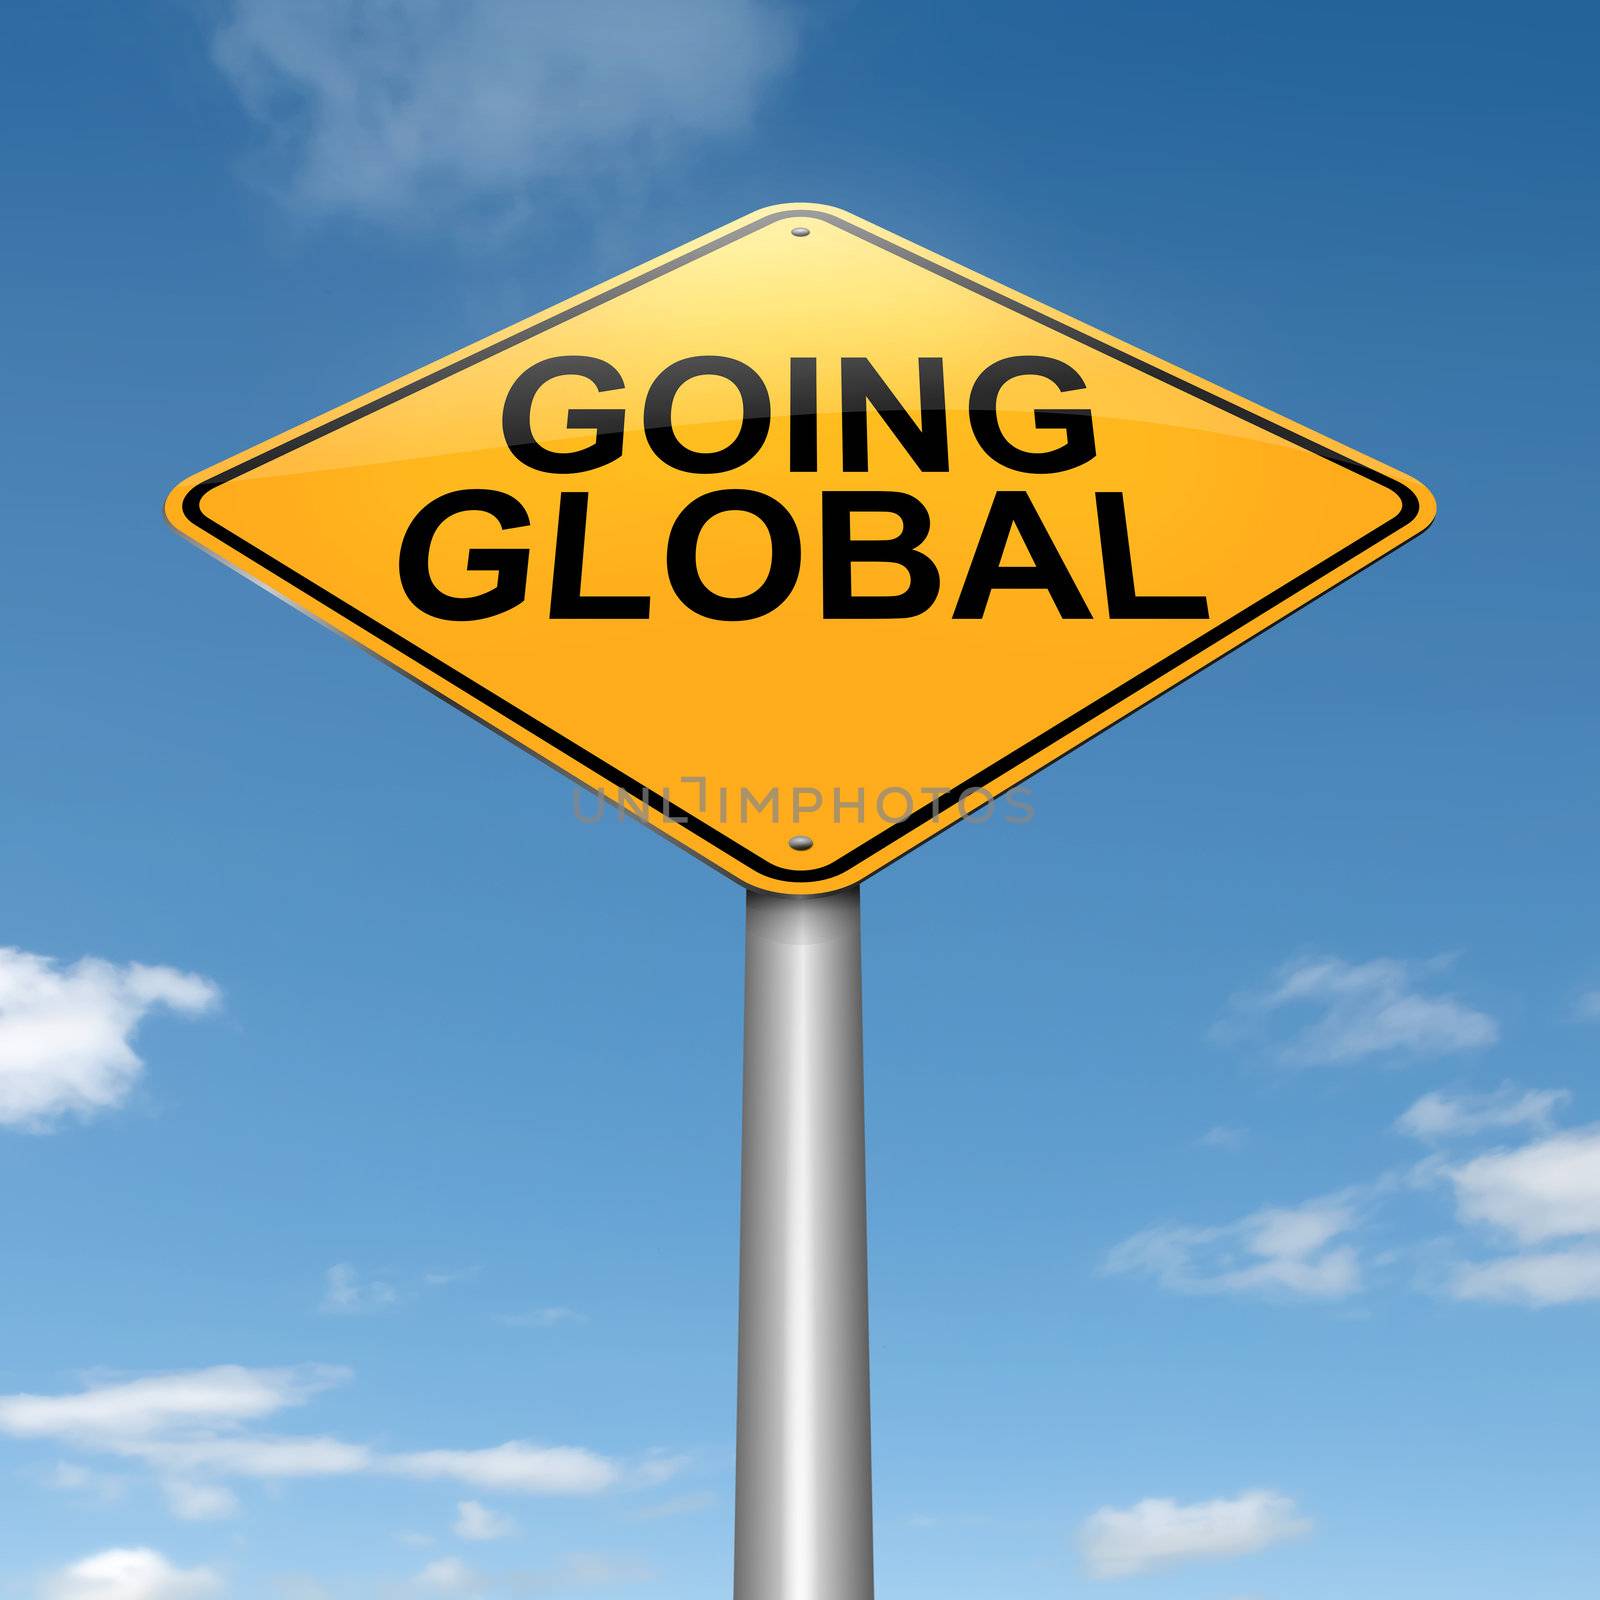 Illustration depicting a roadsign with a going global concept. Sky background.